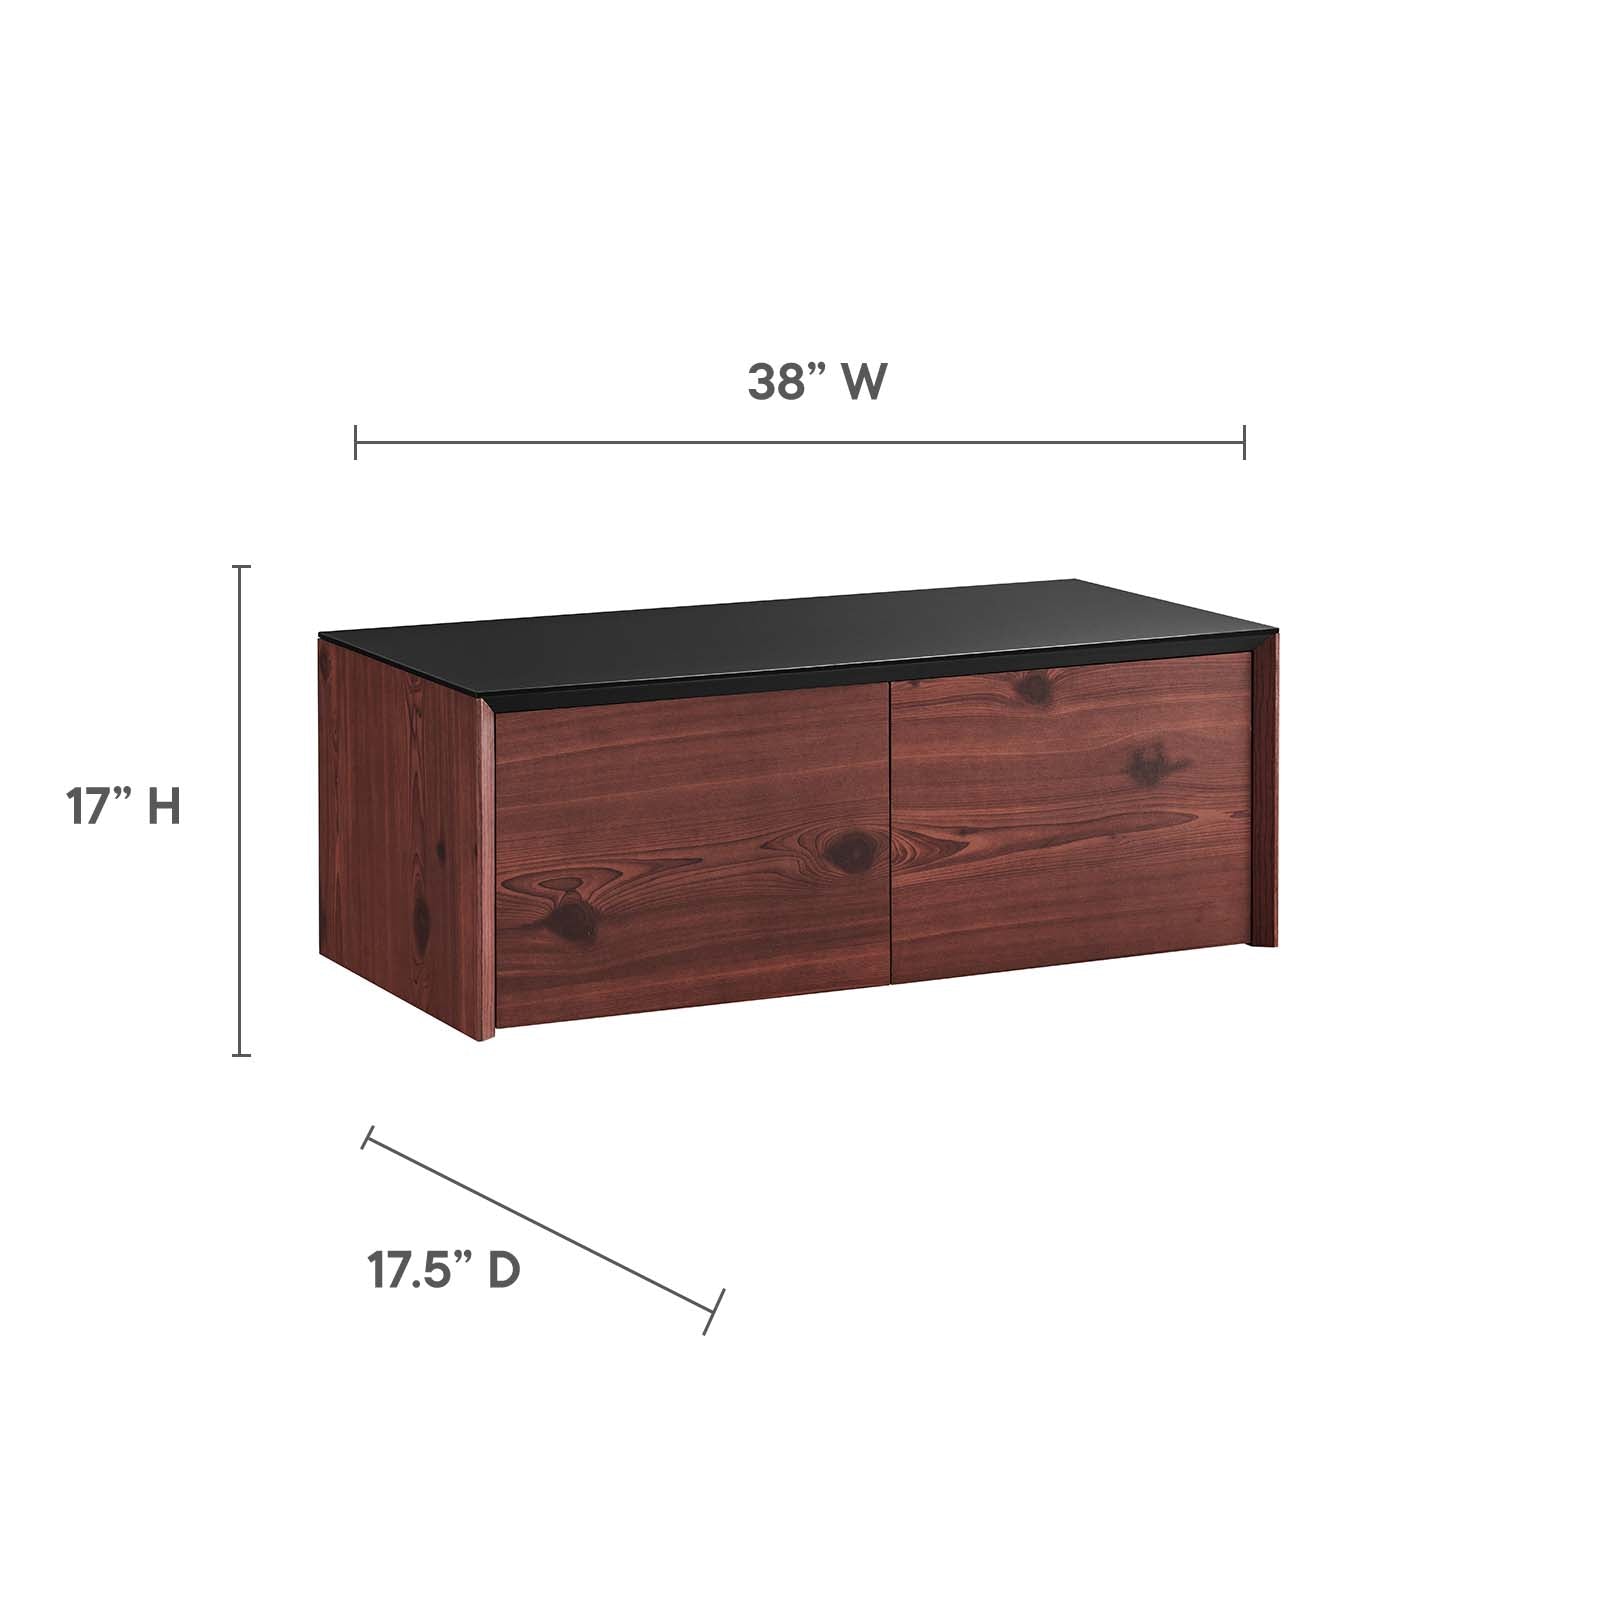 Kinetic 49" Wall-Mount Office Desk With Cabinet and Shelf - East Shore Modern Home Furnishings